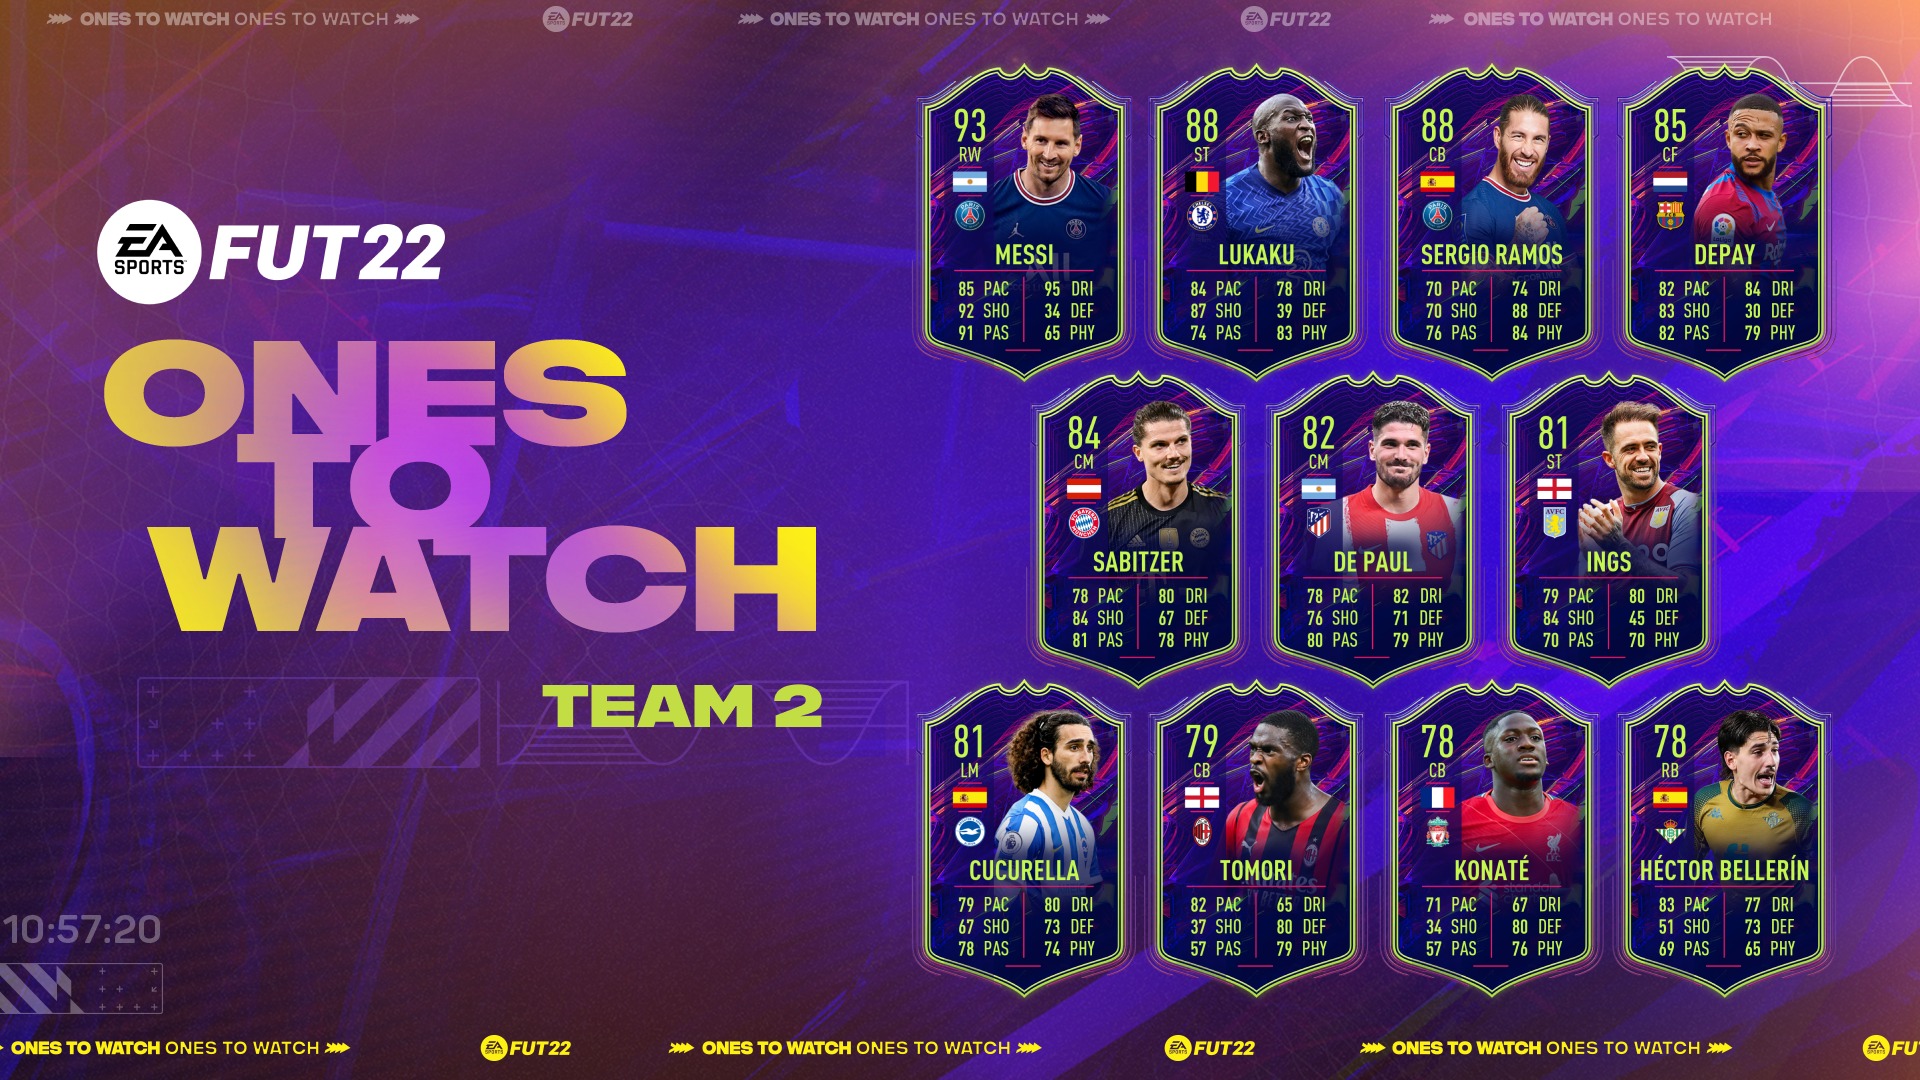 FIFA 22 Ones to Watch Team 2